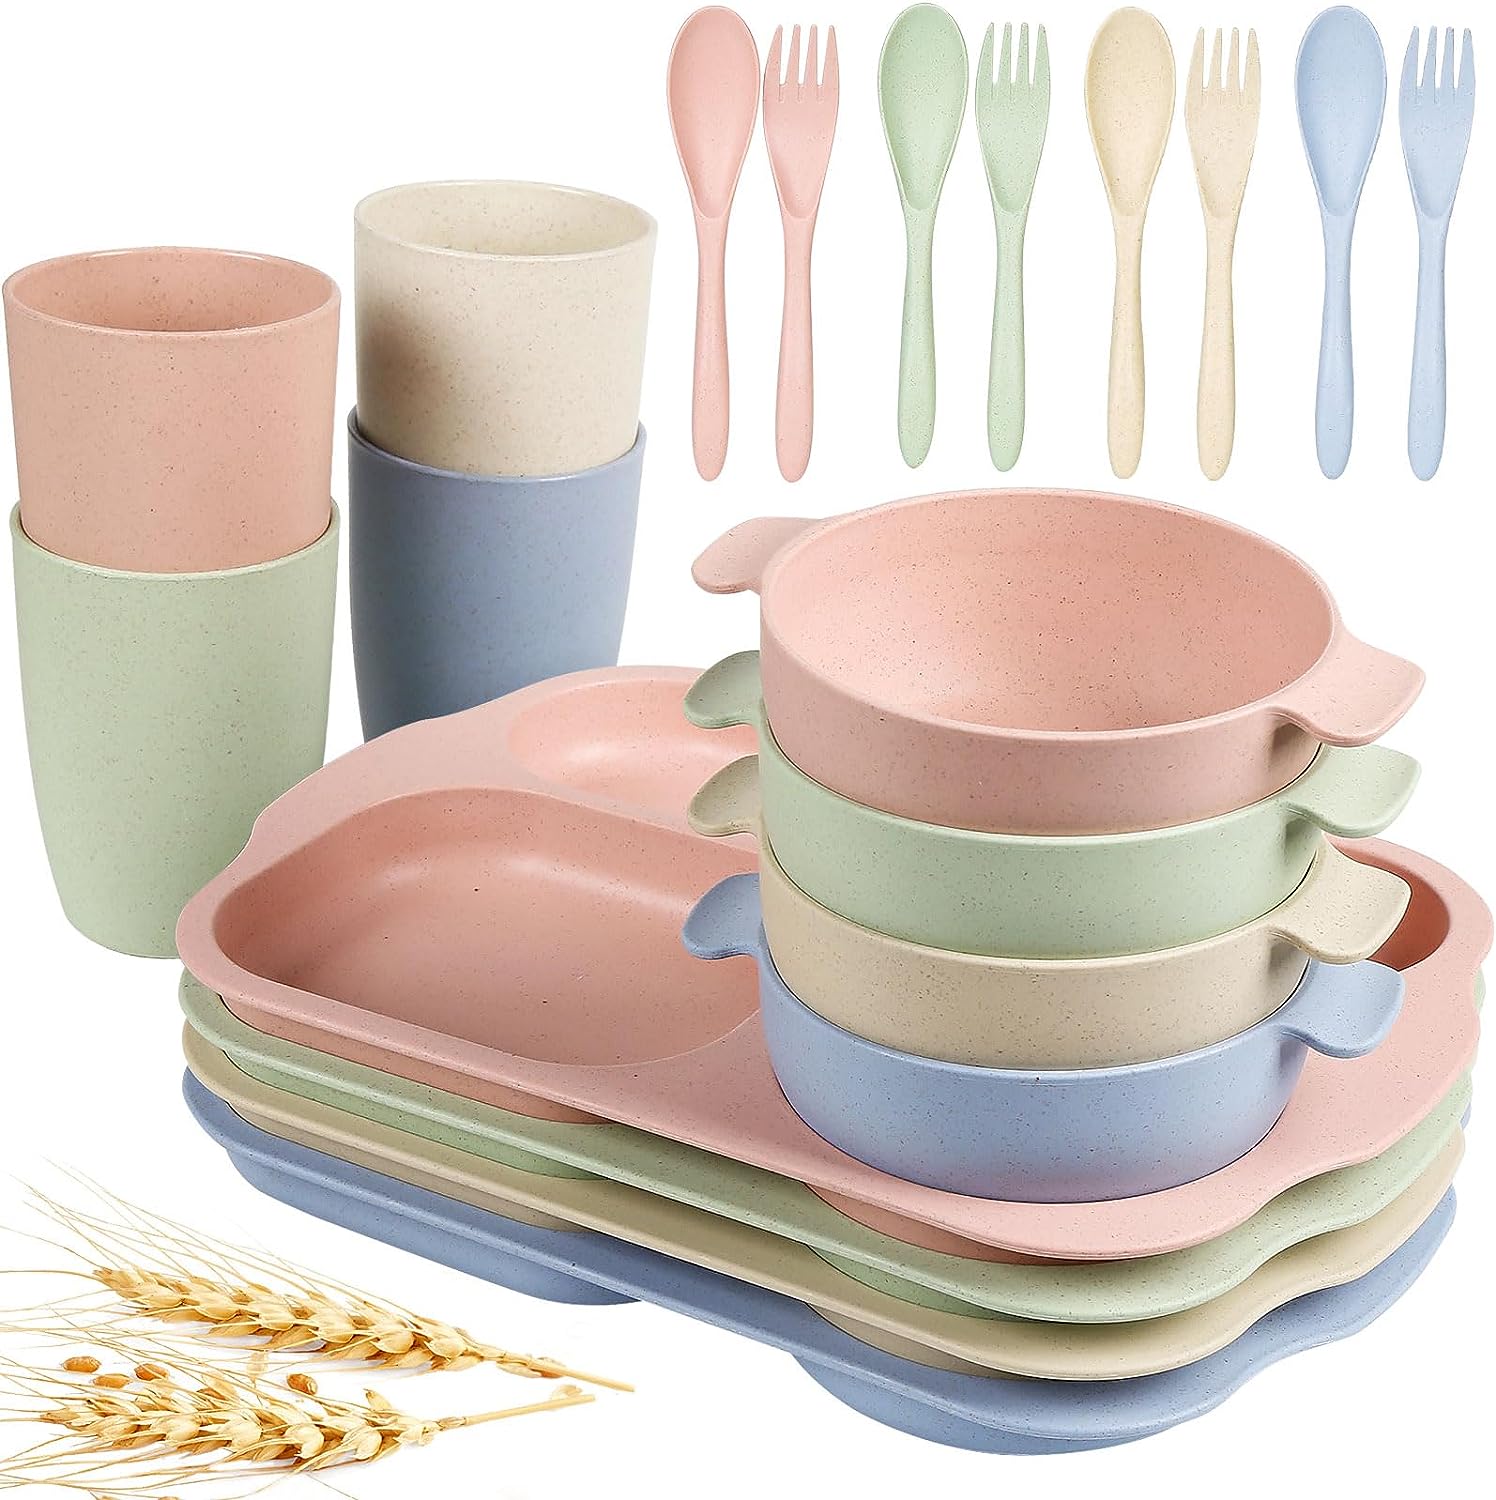 shopwithgreen Wheat Straw Dinnerware Cutlery Set, 20 PCS Kids Toddlers Divided Plates and Bowls Sets, Microwave Unbreakable Tableware Spoon Knife Cup, Dishwasher Safe for Kitchen Picnic School